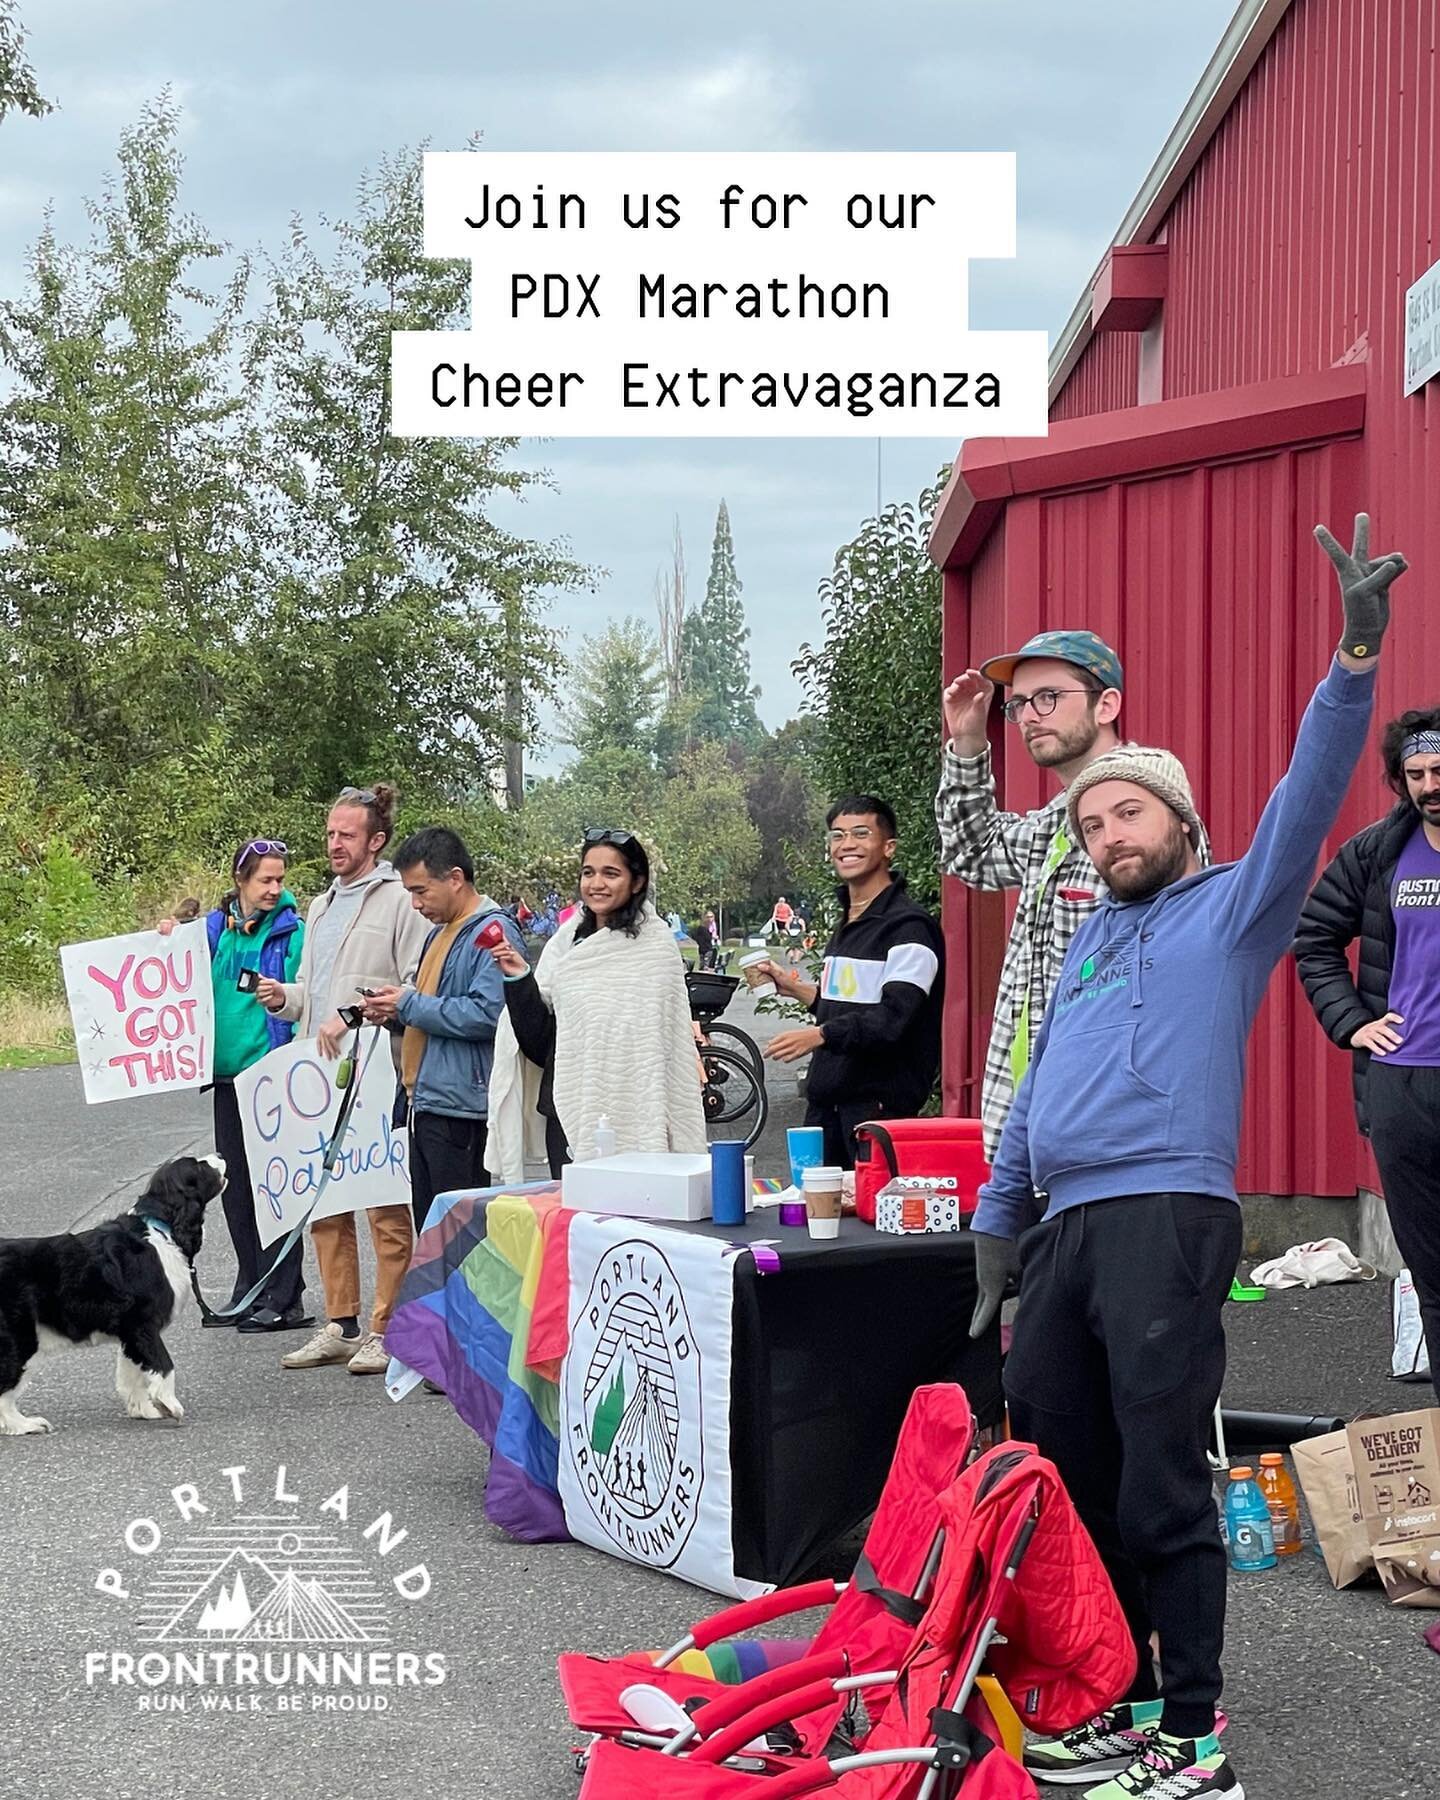 Cheer Extravaganza for PDX Marathon 2022

The Main Deets:
&bull; This Sunday, October 2nd is the&nbsp;Portland Marathon! 
&bull; Starting around 8am, we will have a cheer station near&nbsp;Kerr Bikes in SE near OMSI. 
&bull; Point person for the chee